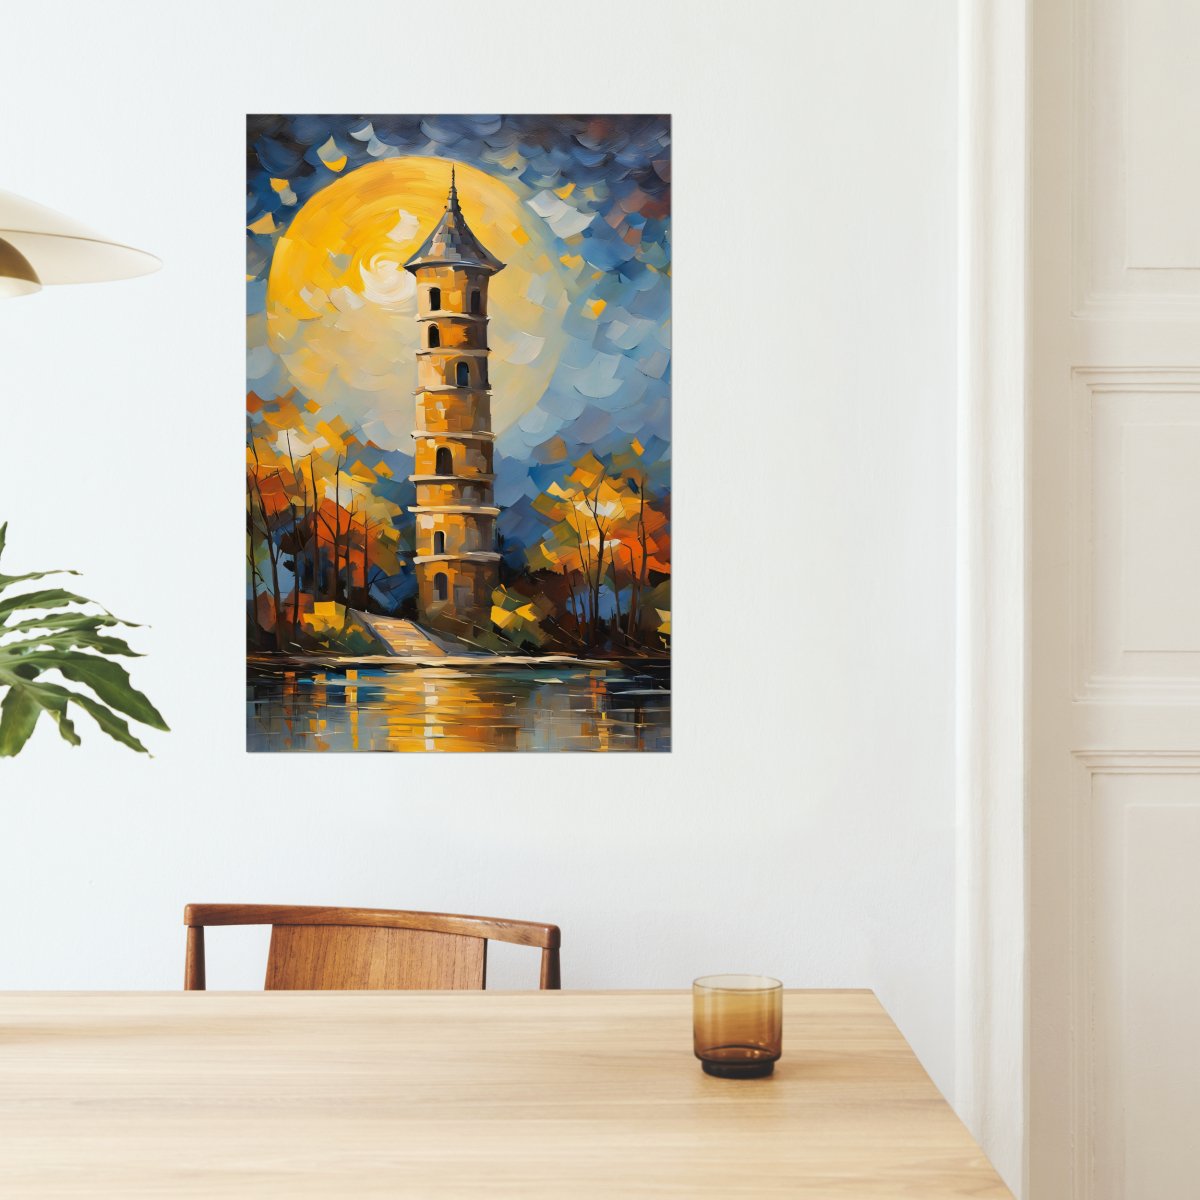 Fullmoon spire - Art print - Poster - Ever colorful